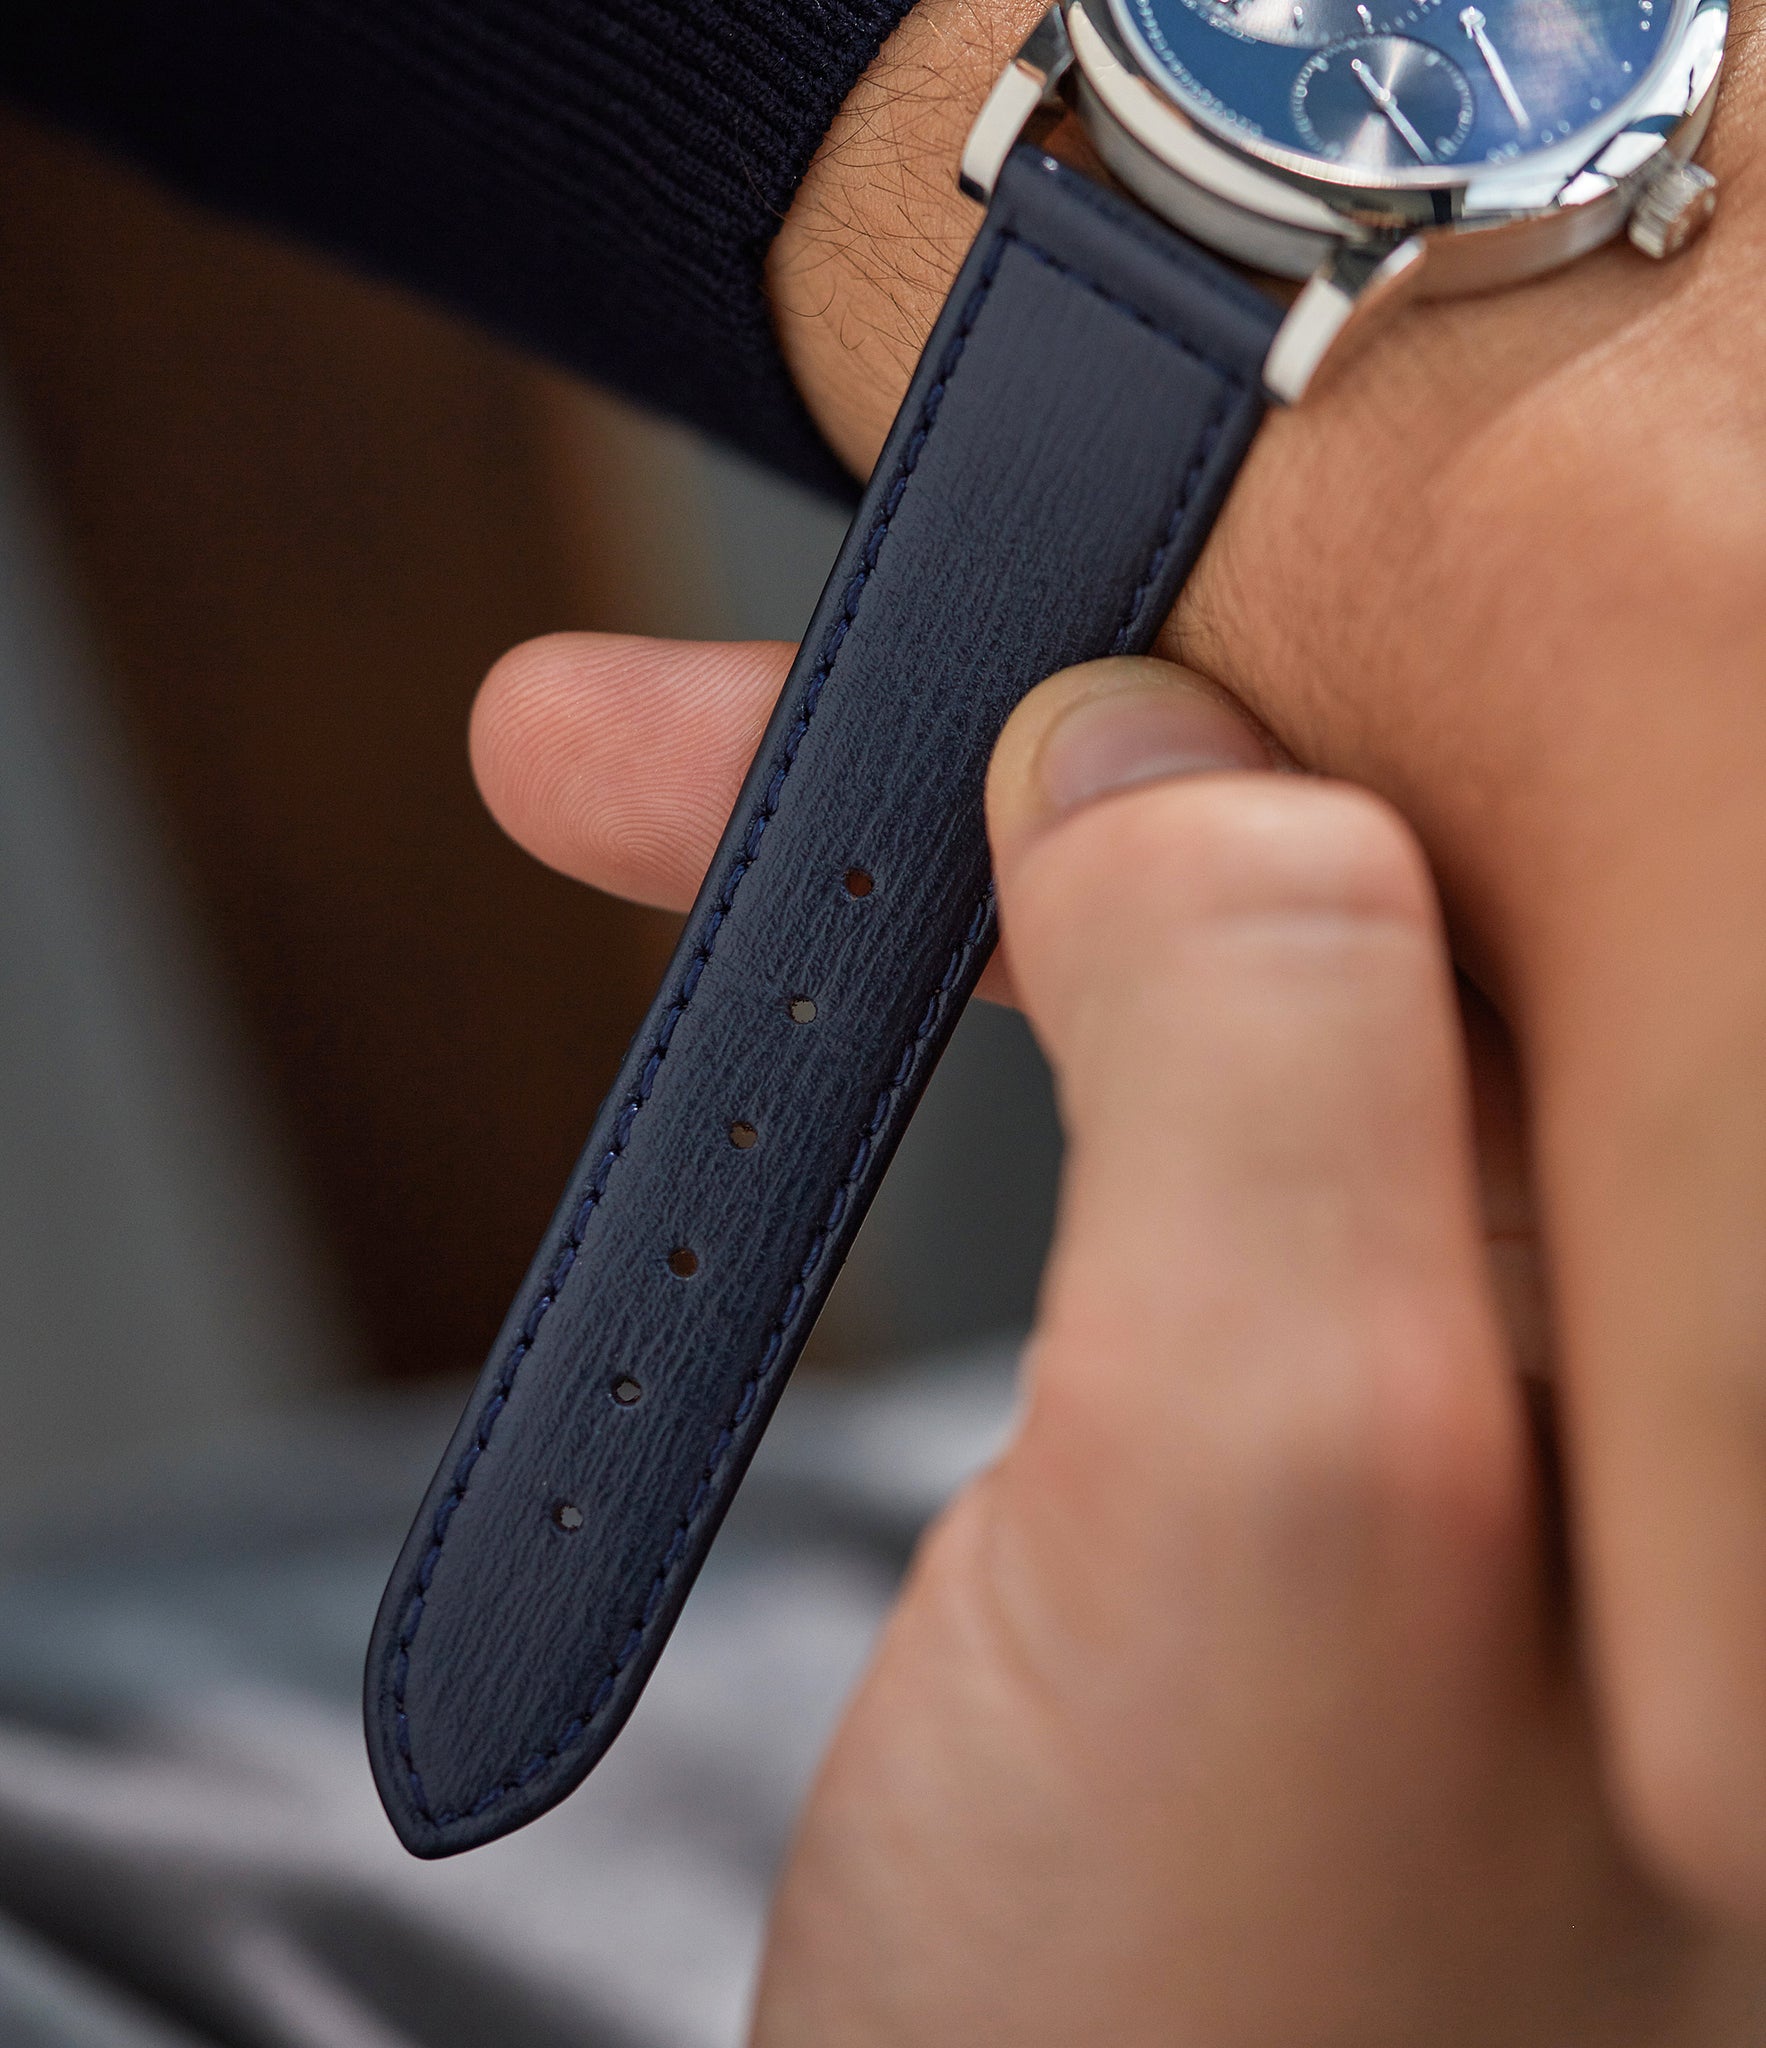 Buy Santorini II JPM watch strap A. Lange & Sohne navy blue saffiano leather box stitched quick-release springbars buckle handcrafted European-made for sale online at A Collected Man London